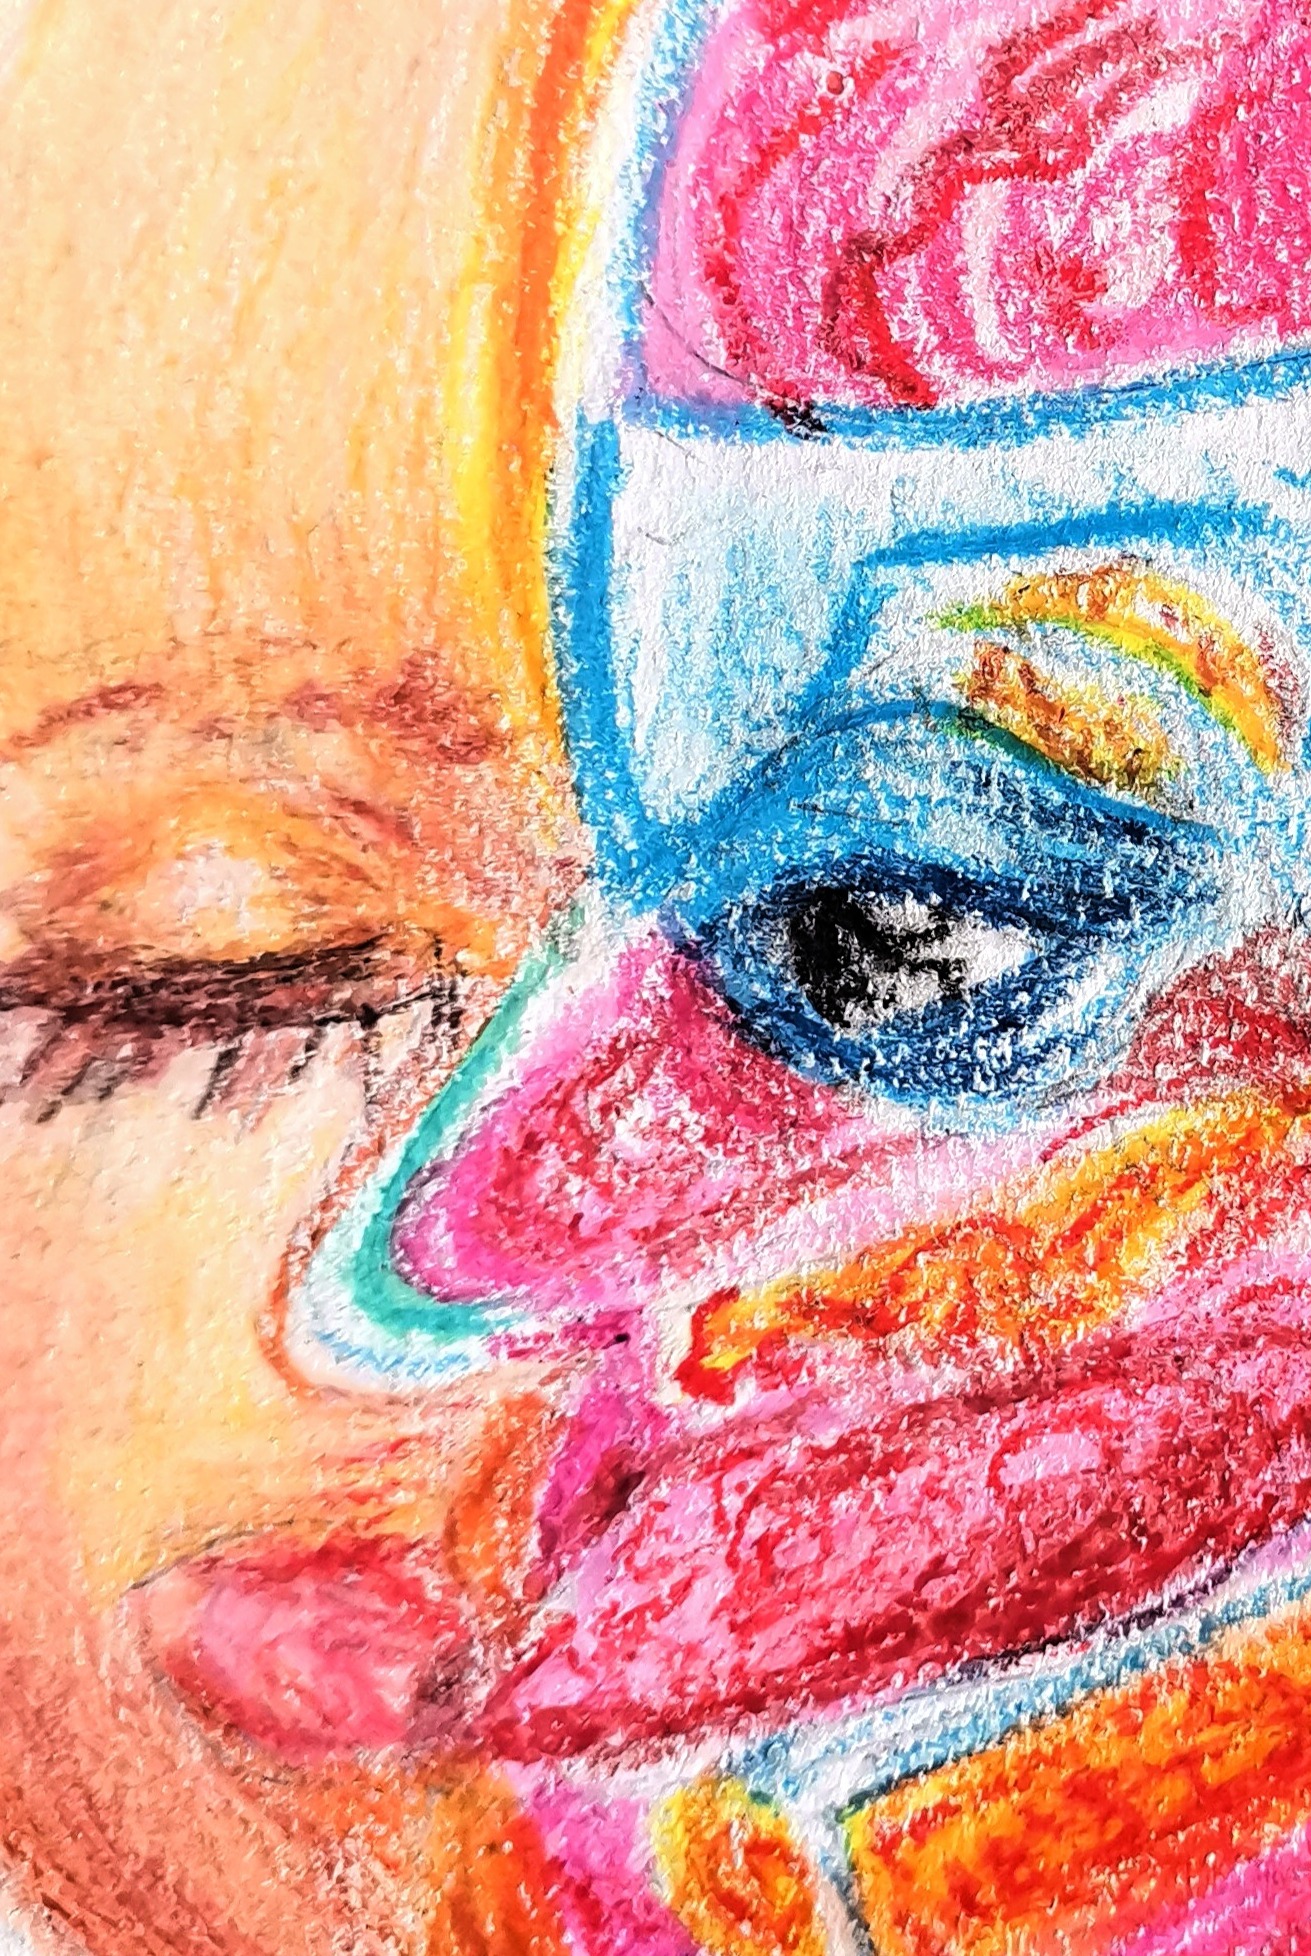 Oil pastel drawing of a baby's dissected head. The brain, skull, buccal pads, facial muscles and tounge can be seen from the side.